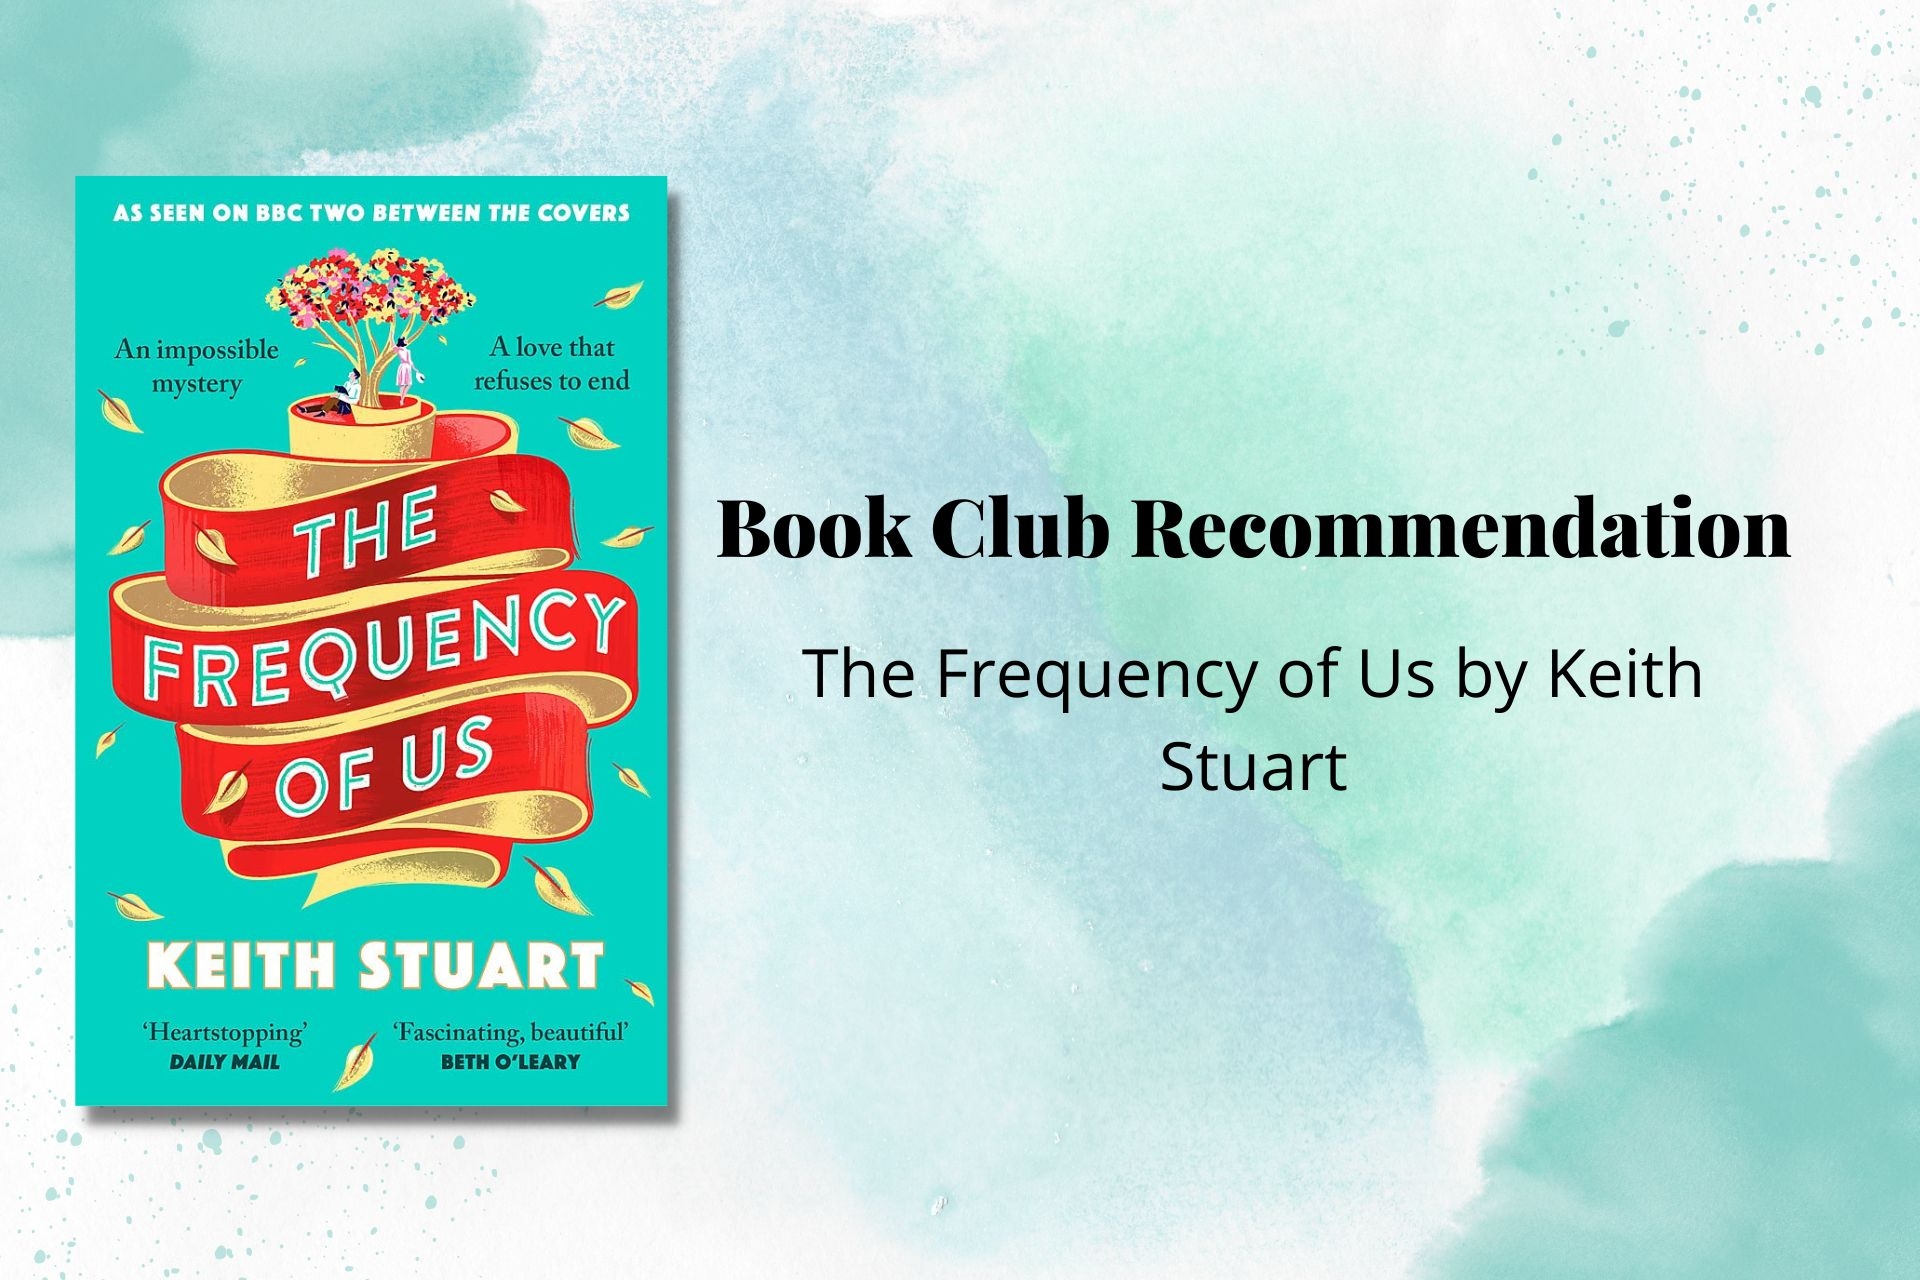 August 2022 Book Club Recommendation: The Frequency of Us by Keith Stuart